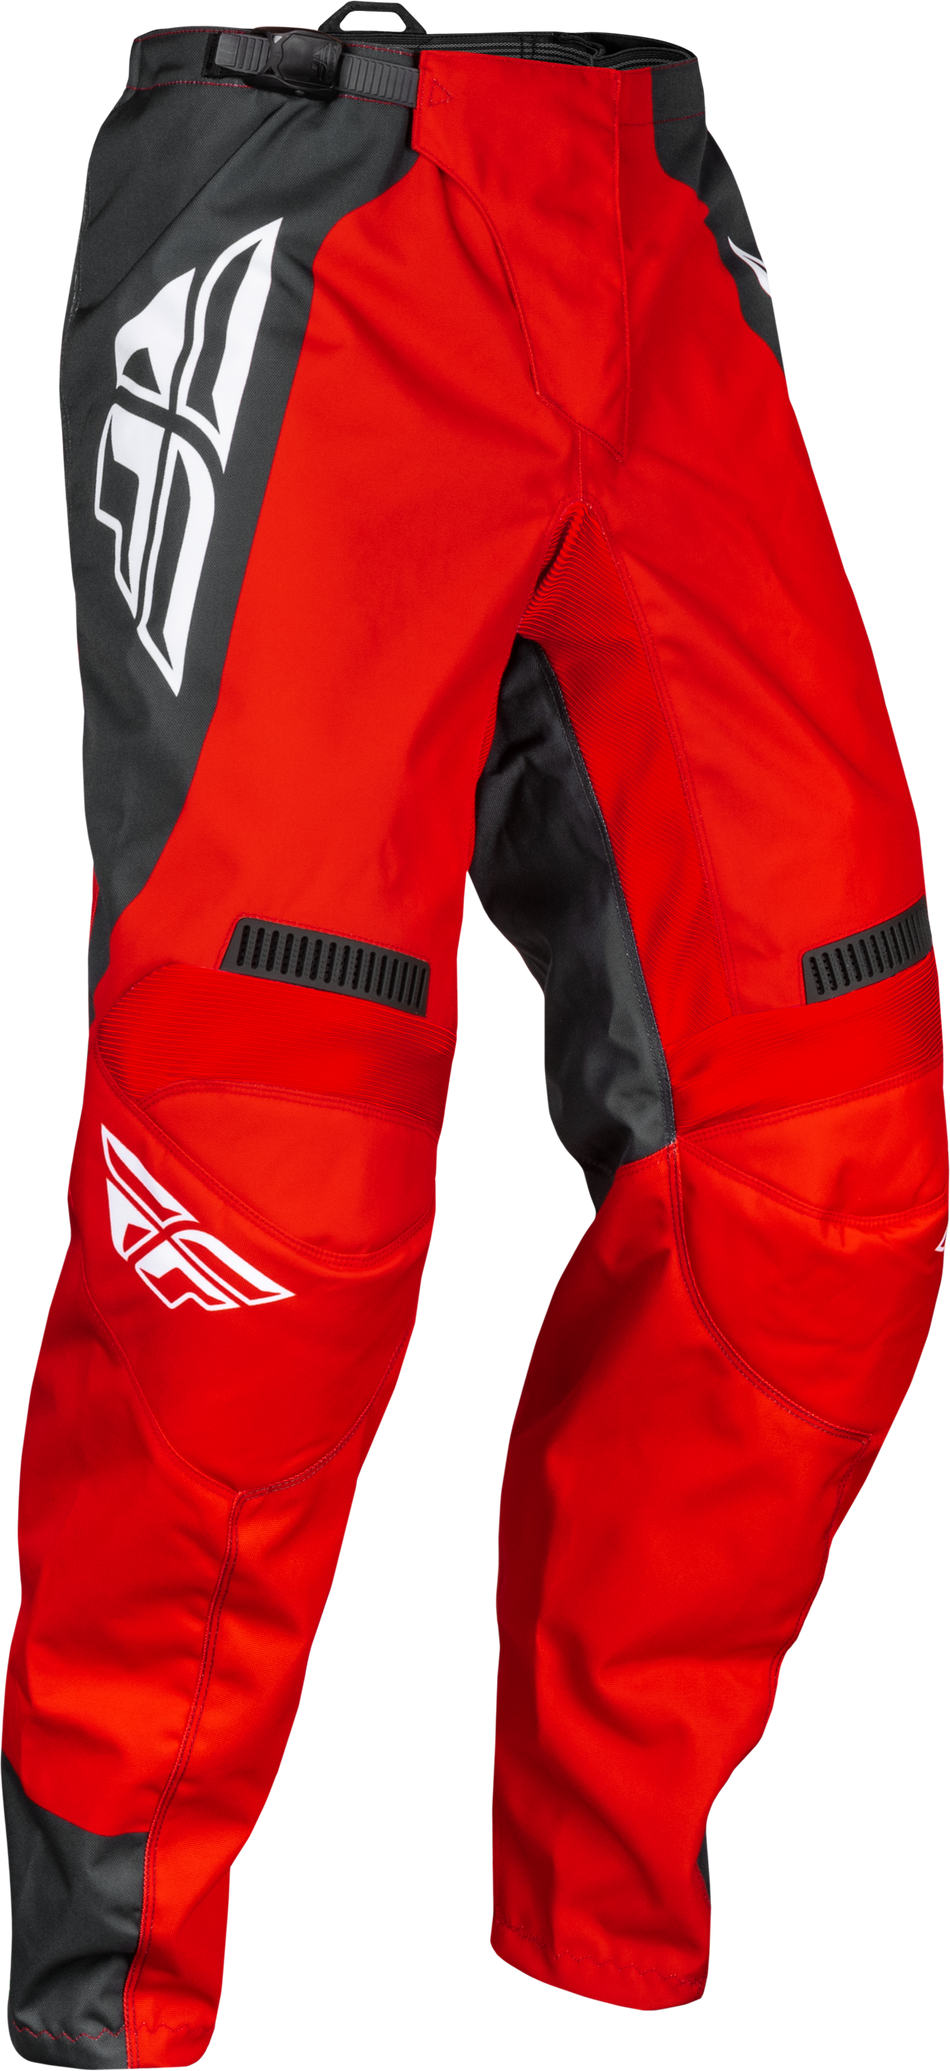 FLY RACING F-16 Pants Red/Charcoal/White Sz 32 377-93332